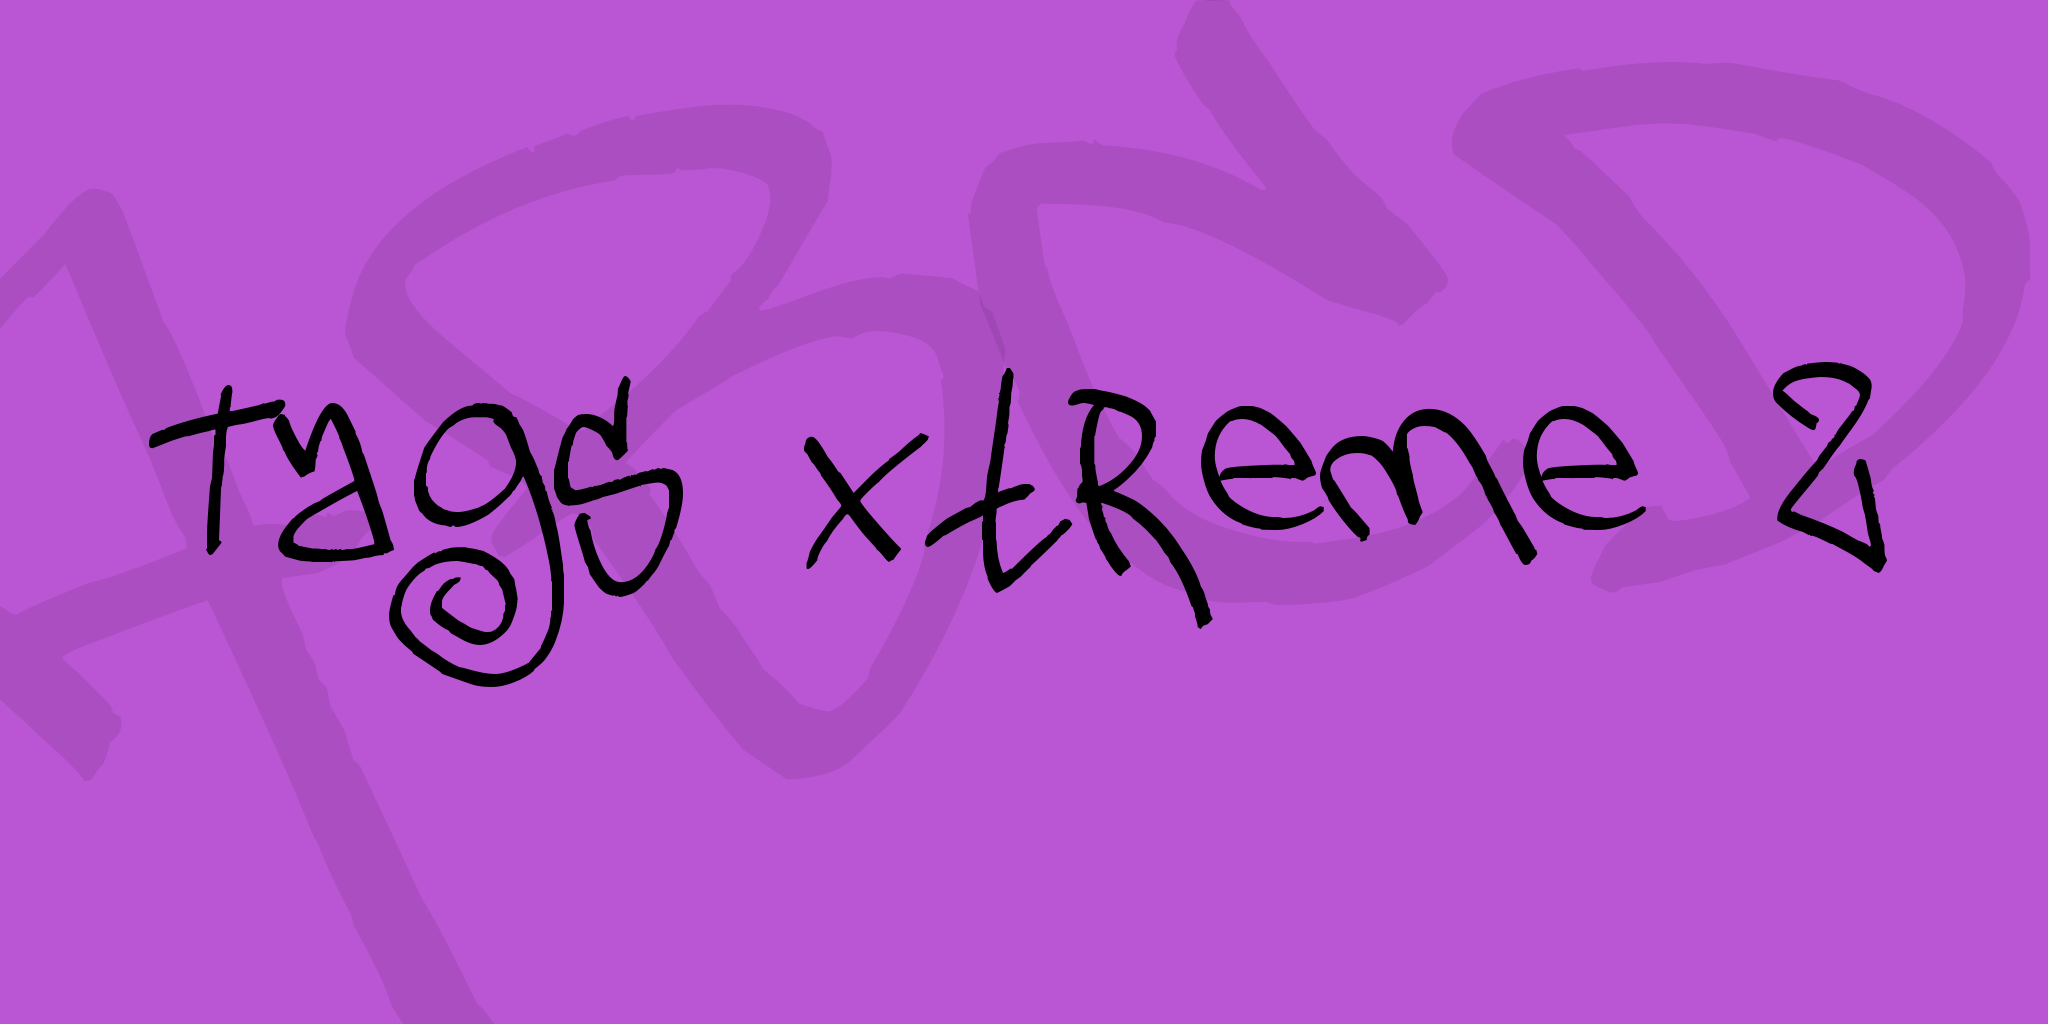 Tags Xtreme 2